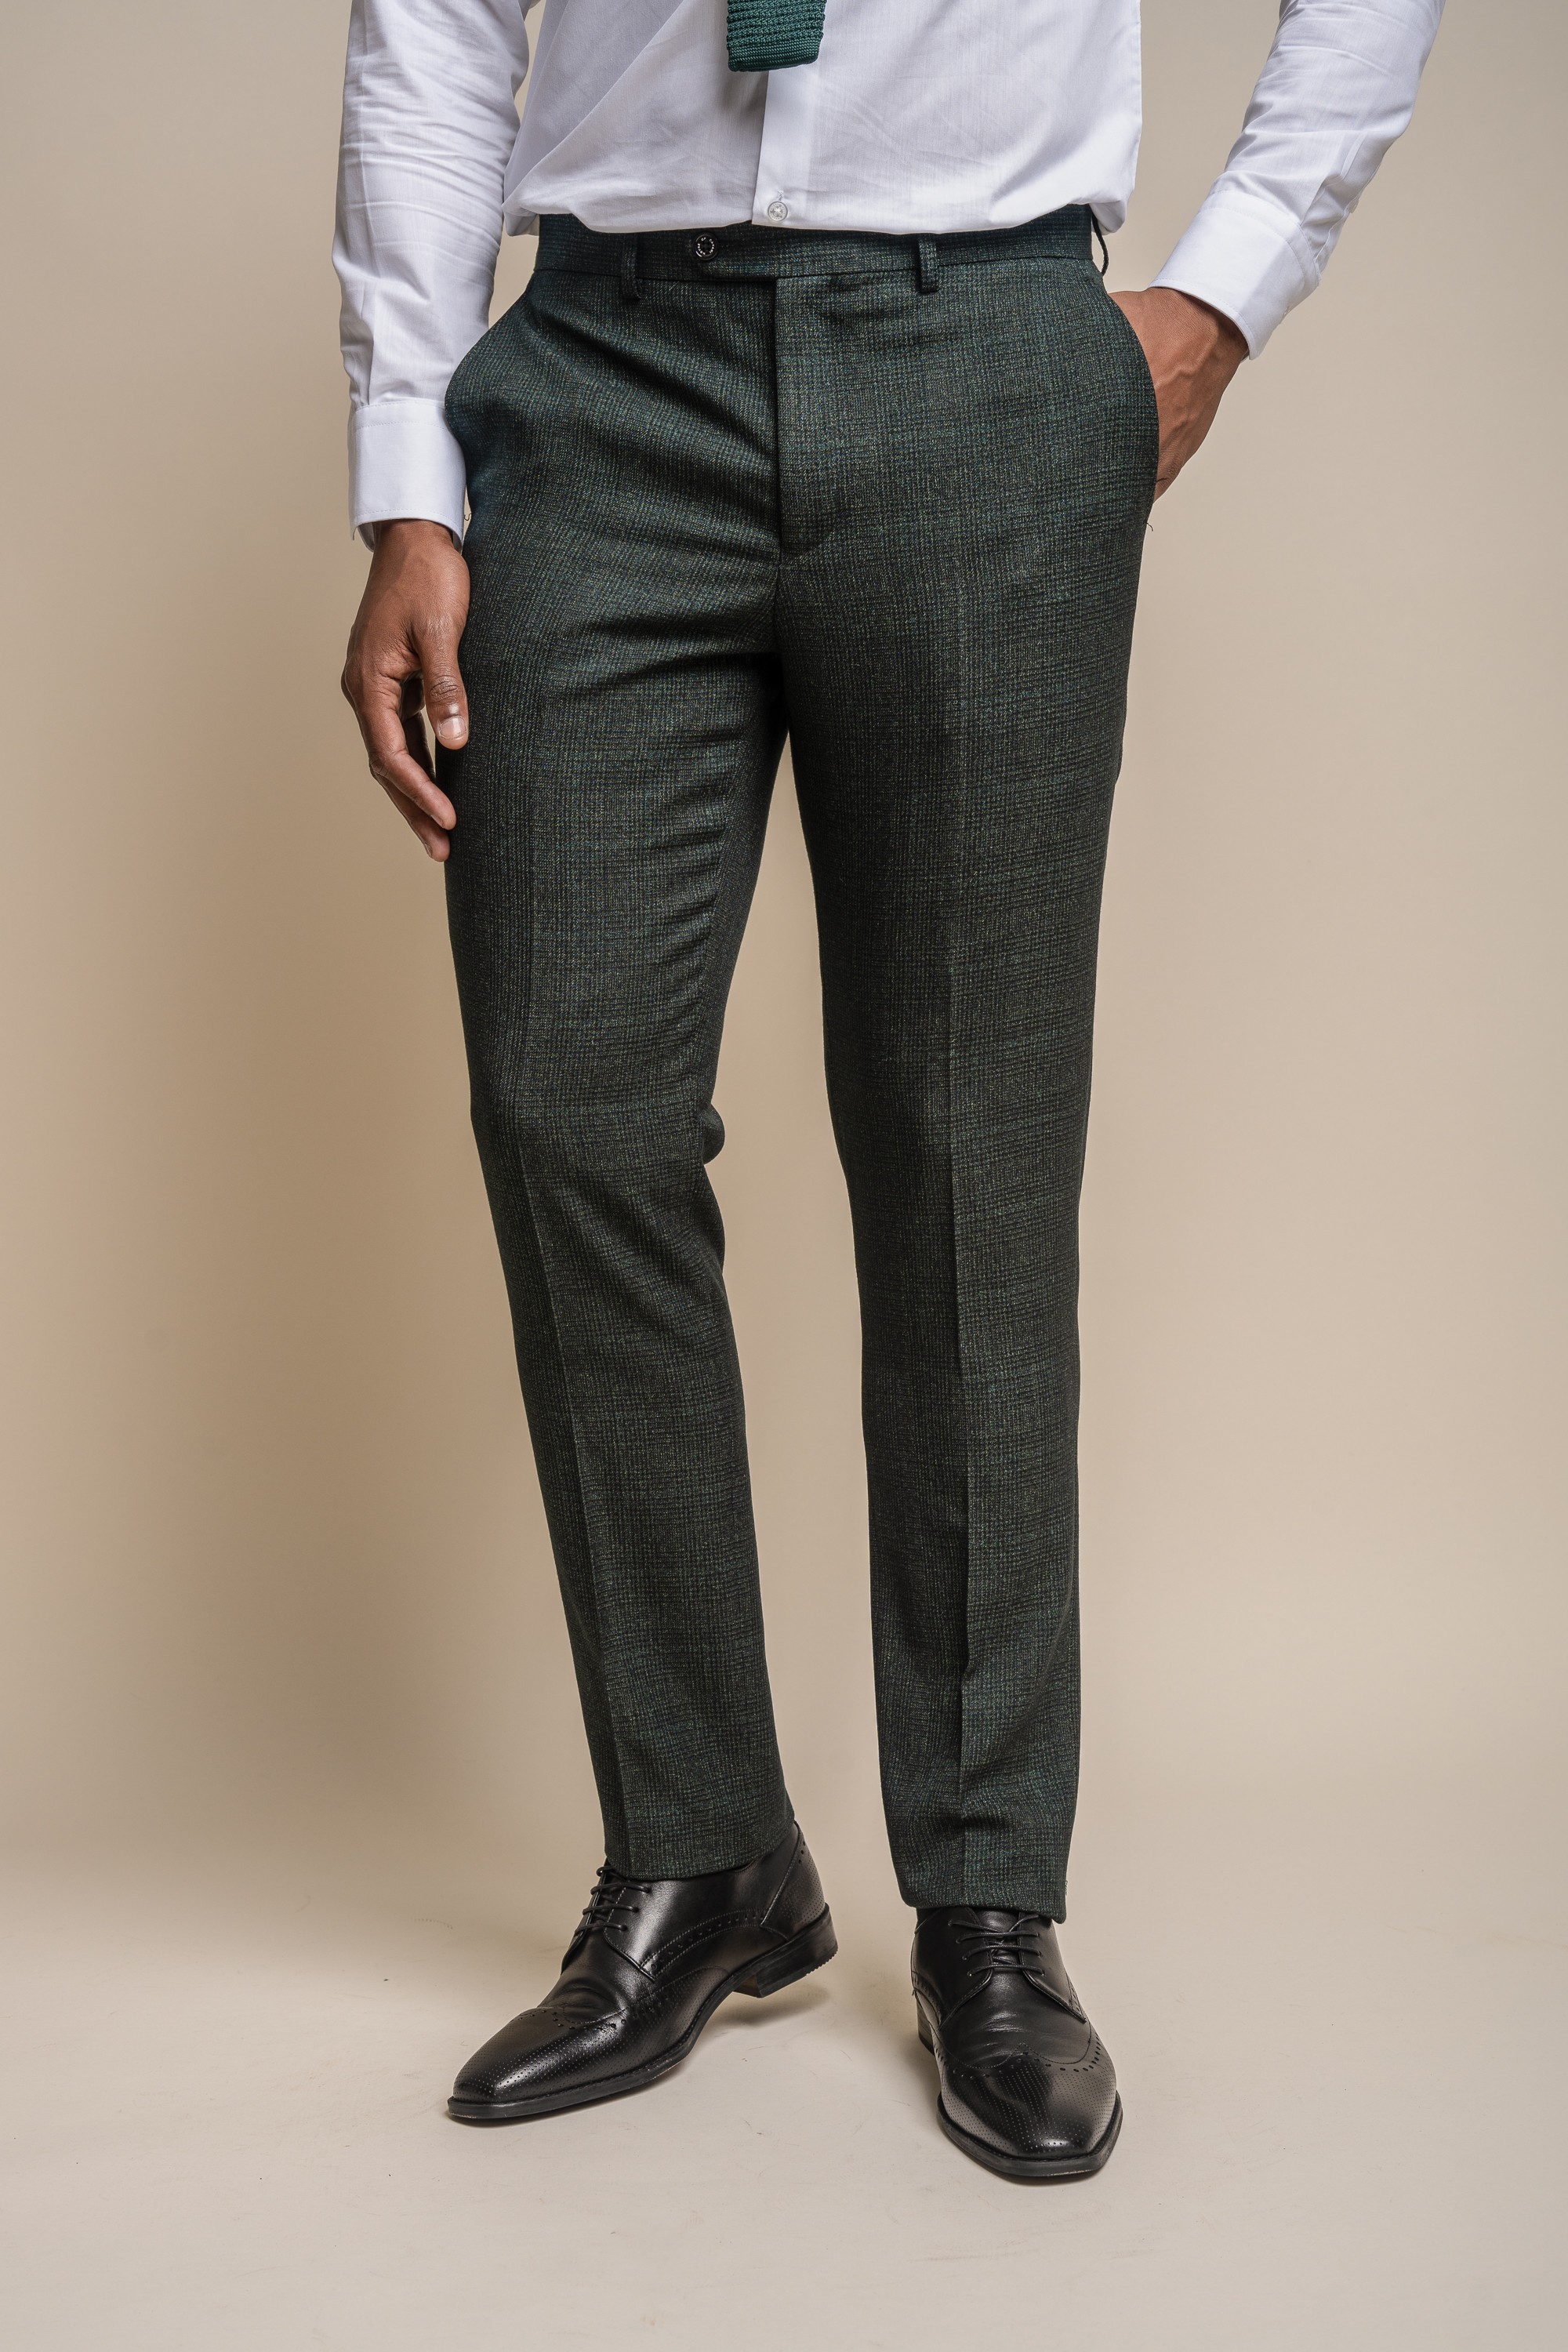 Men's Tweed Houndstooth Check Slim Fit Trousers - CARIDI